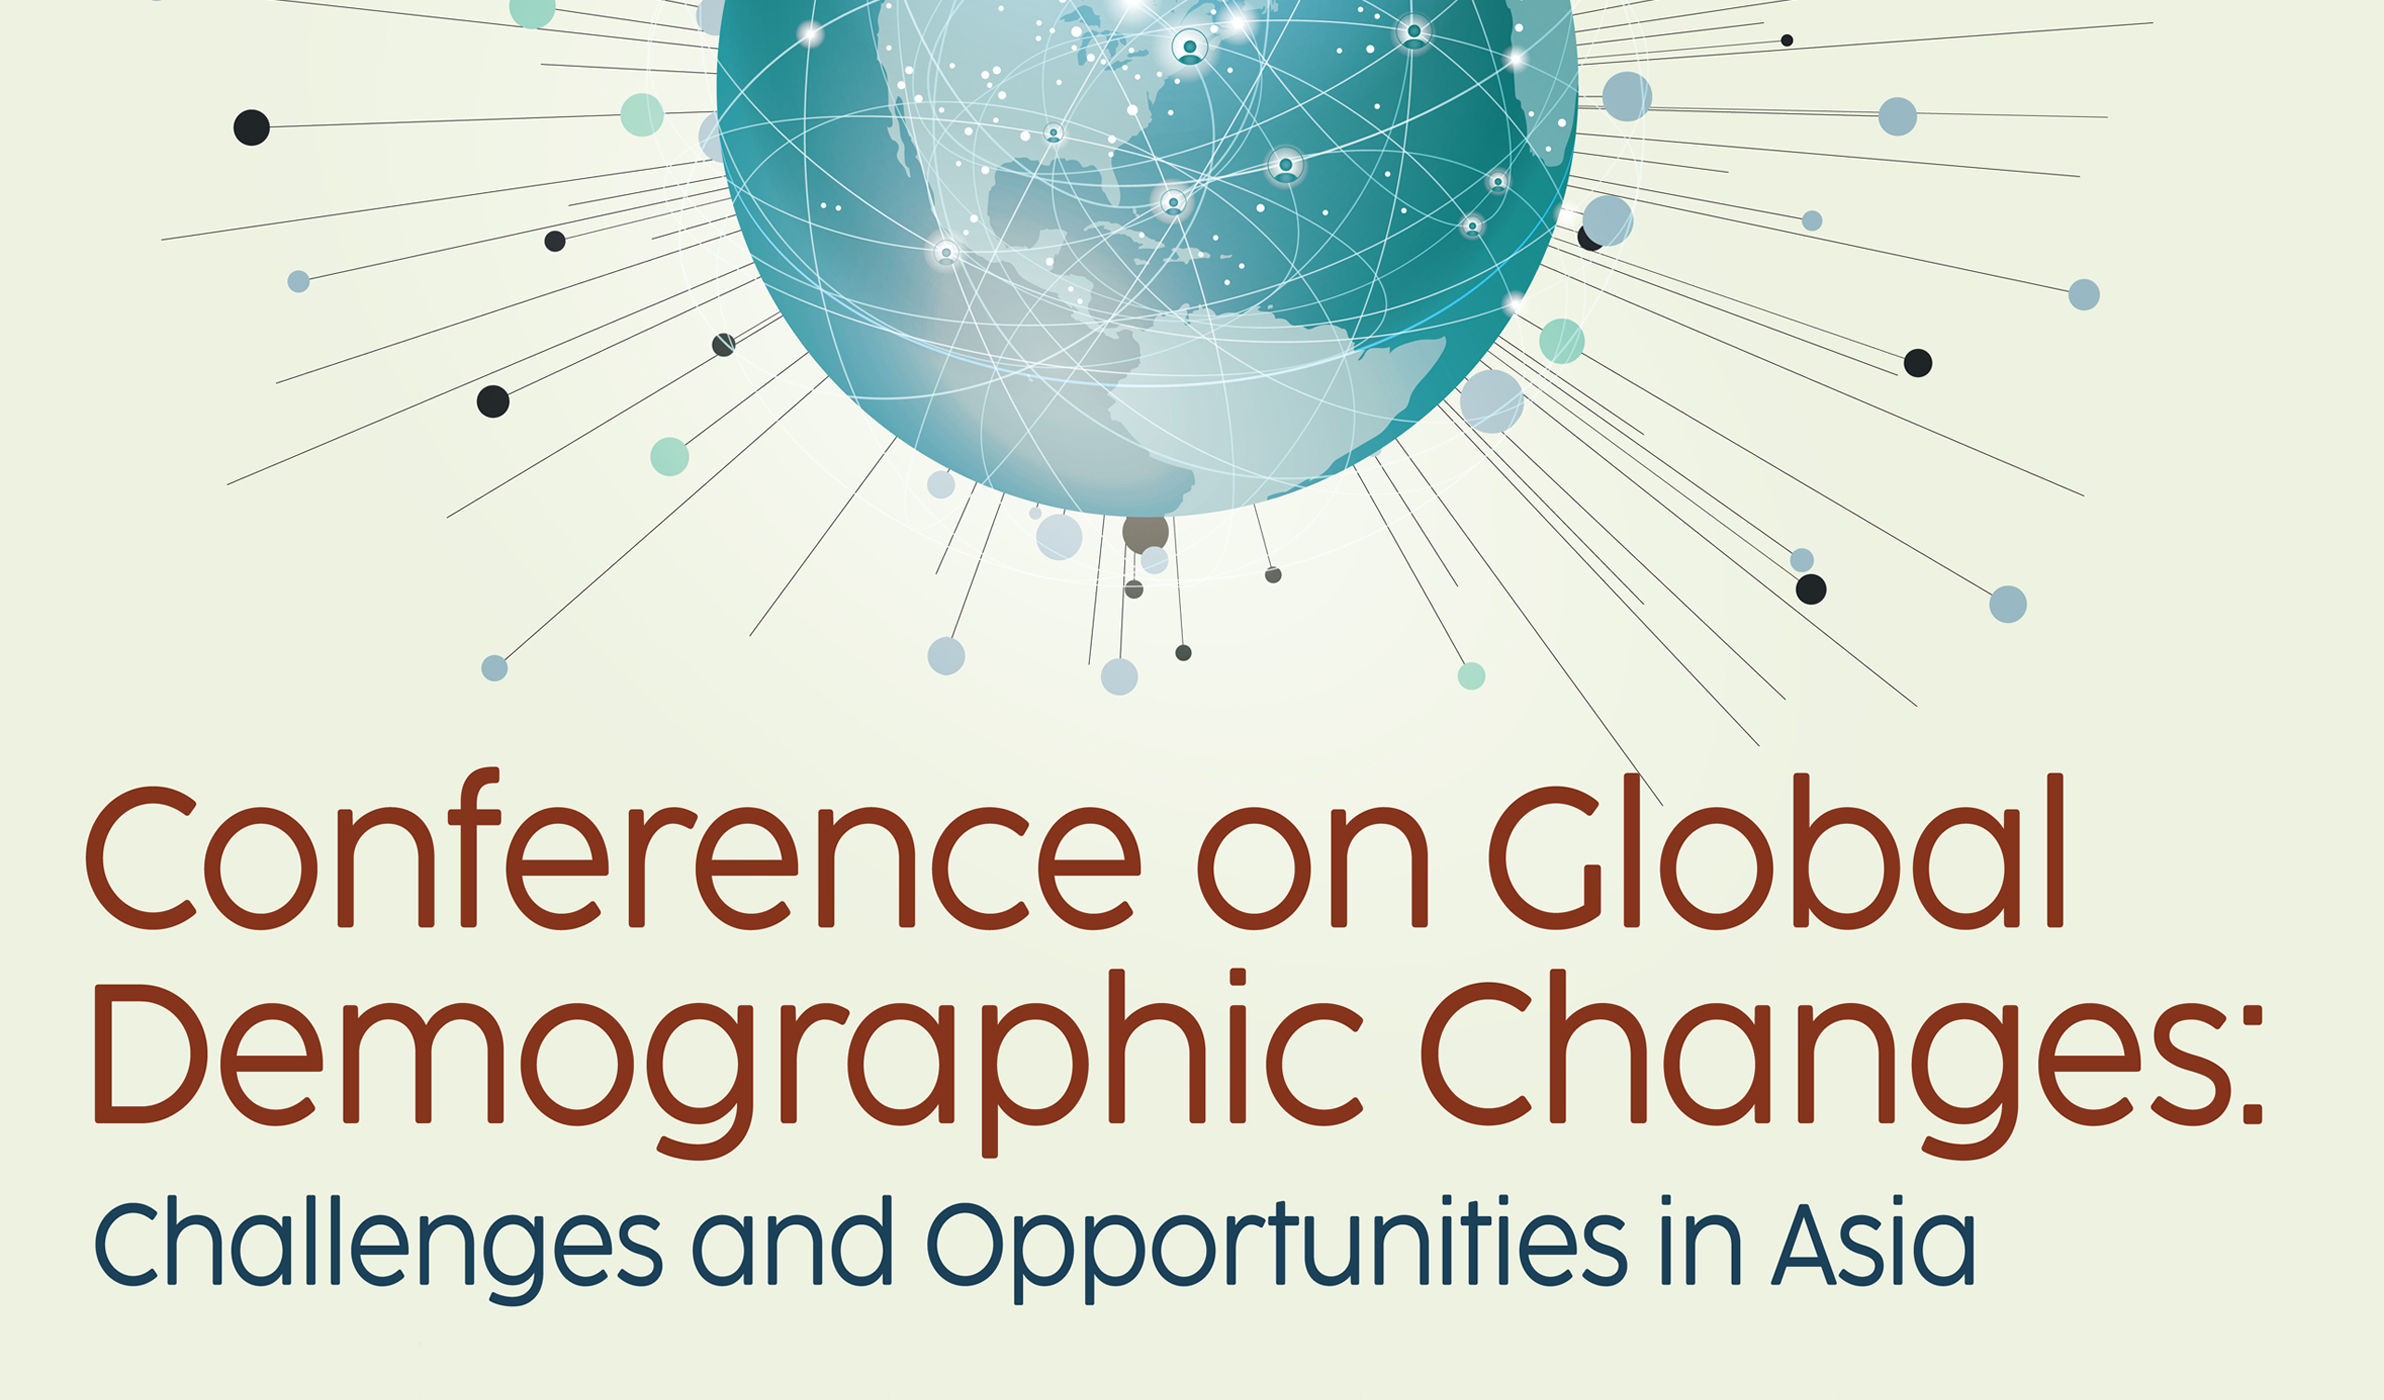 Conference on Global Demographic Changes: Challenges and Opportunities in Asia